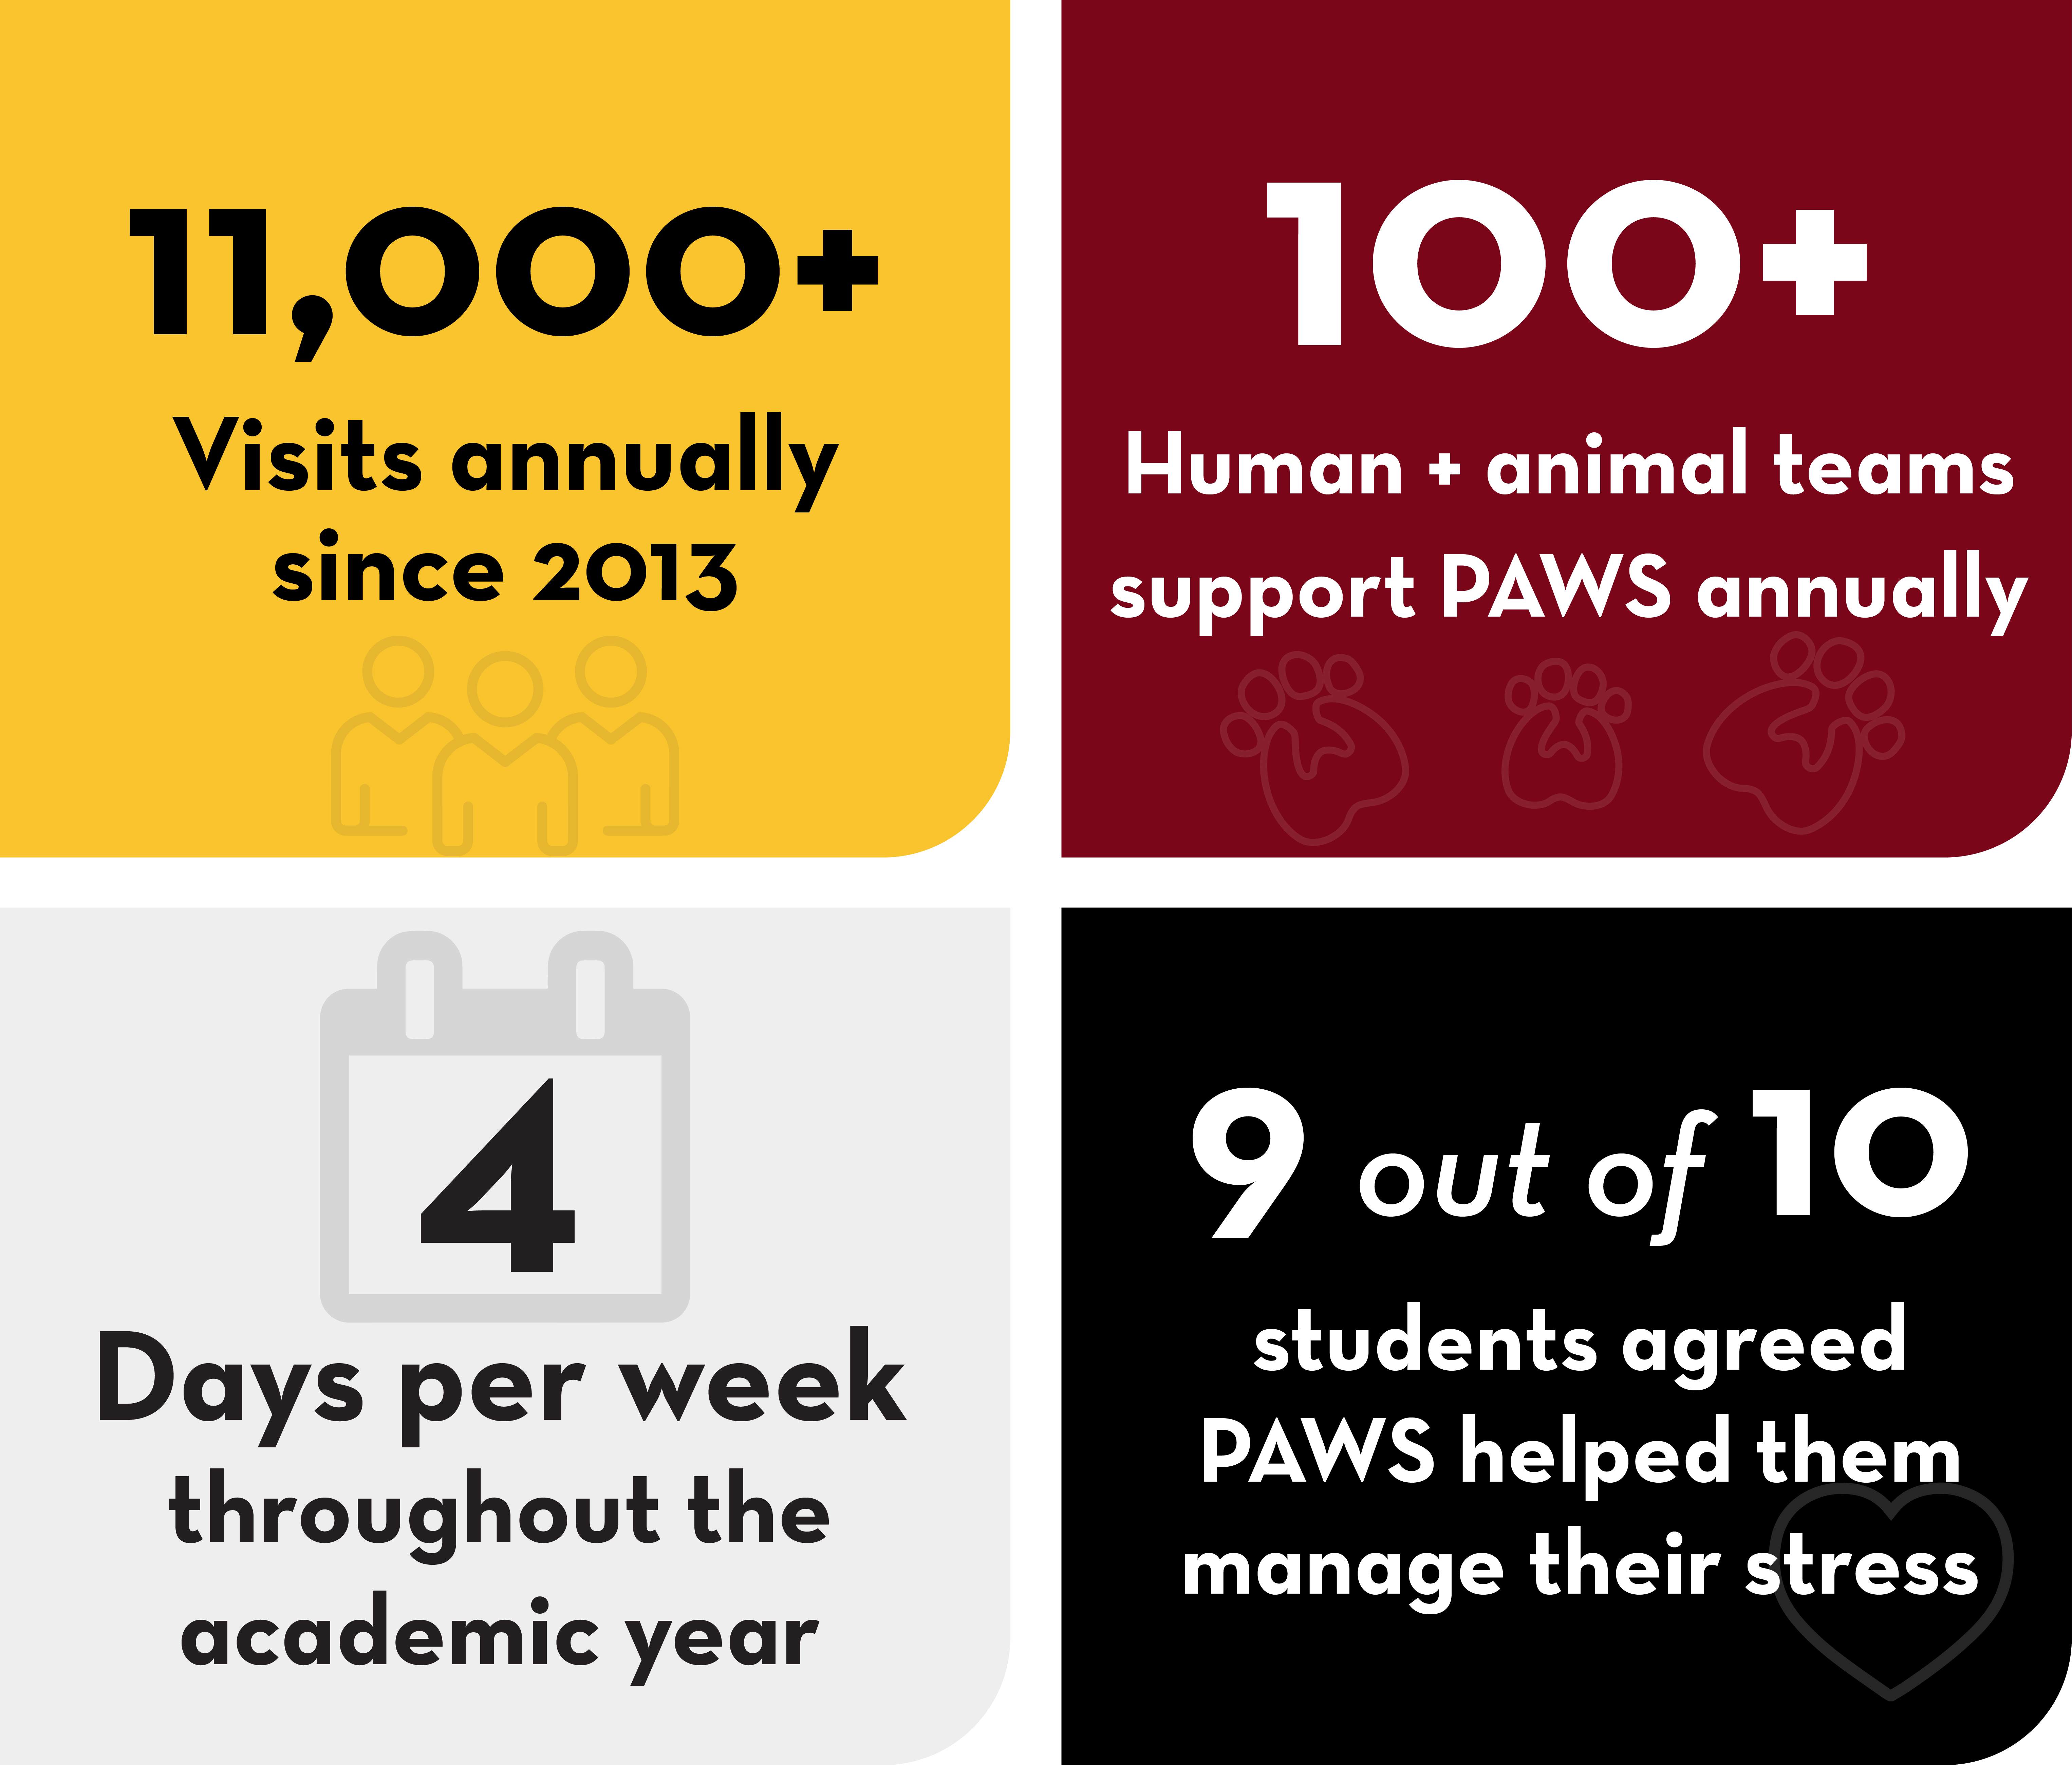 PAWS by the numbers: 11,000+ Visits annually since 2013; 100+ Human + animal teams support PAWS annually; 4 Days per week throughout the academic year; 9 out of 10 students agreed PAWS helped them manage their stress